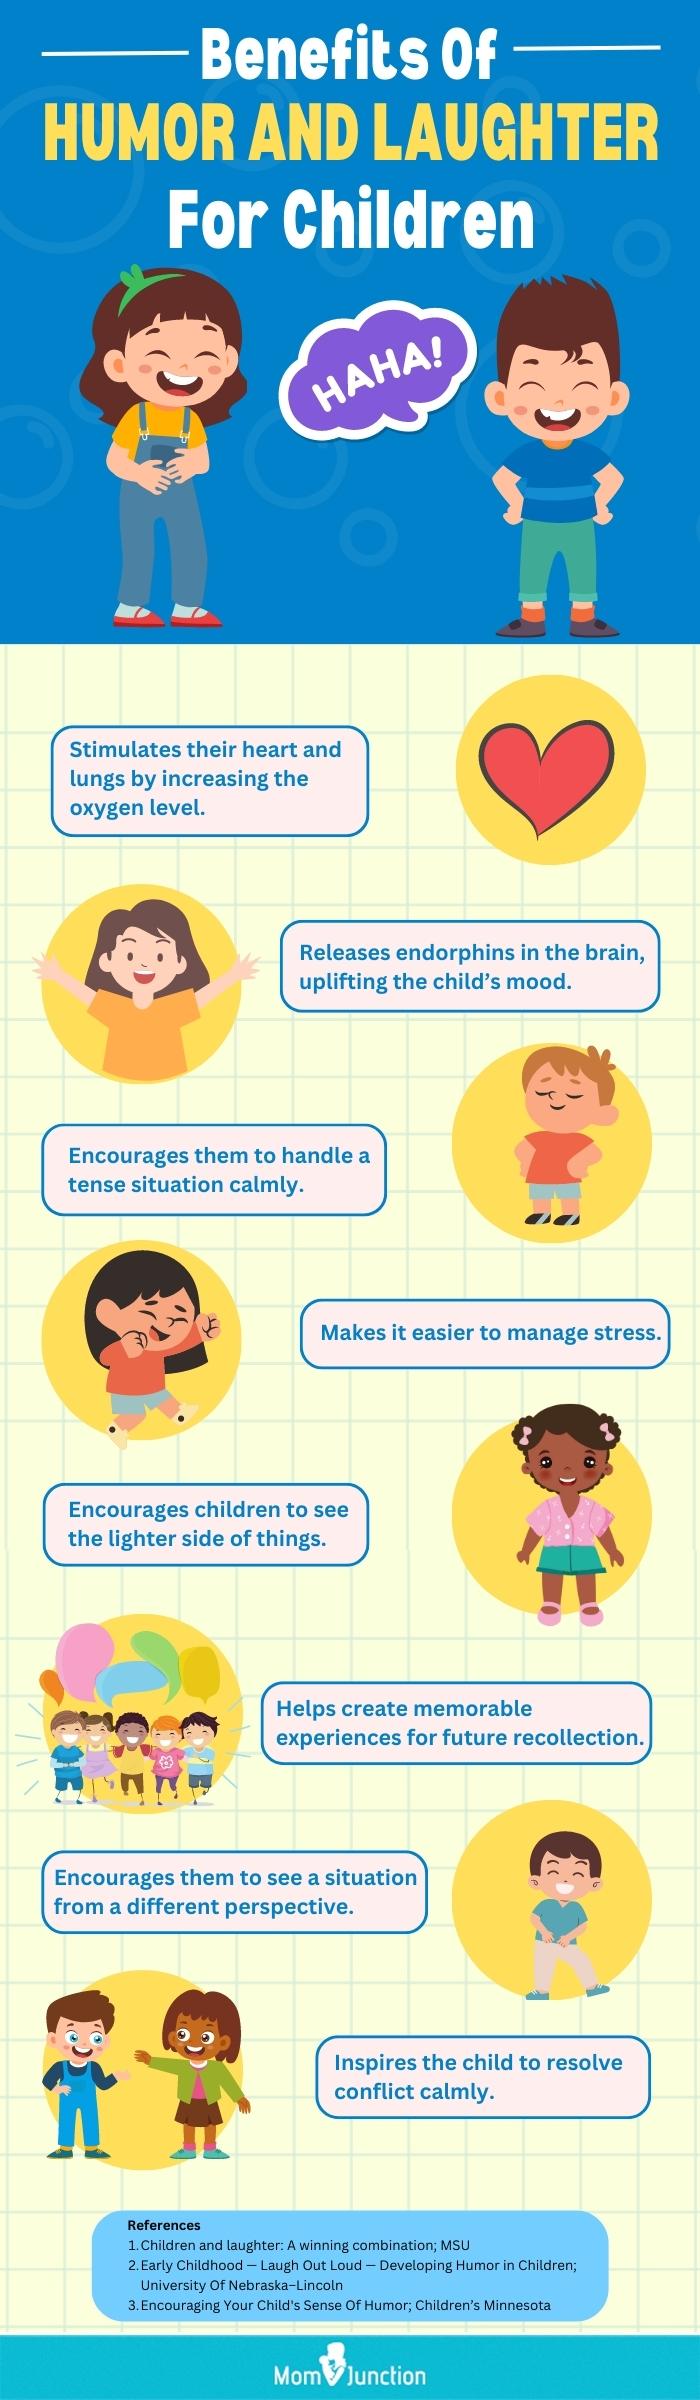 Benefits Of Humor And Laughter For Children (infographic)